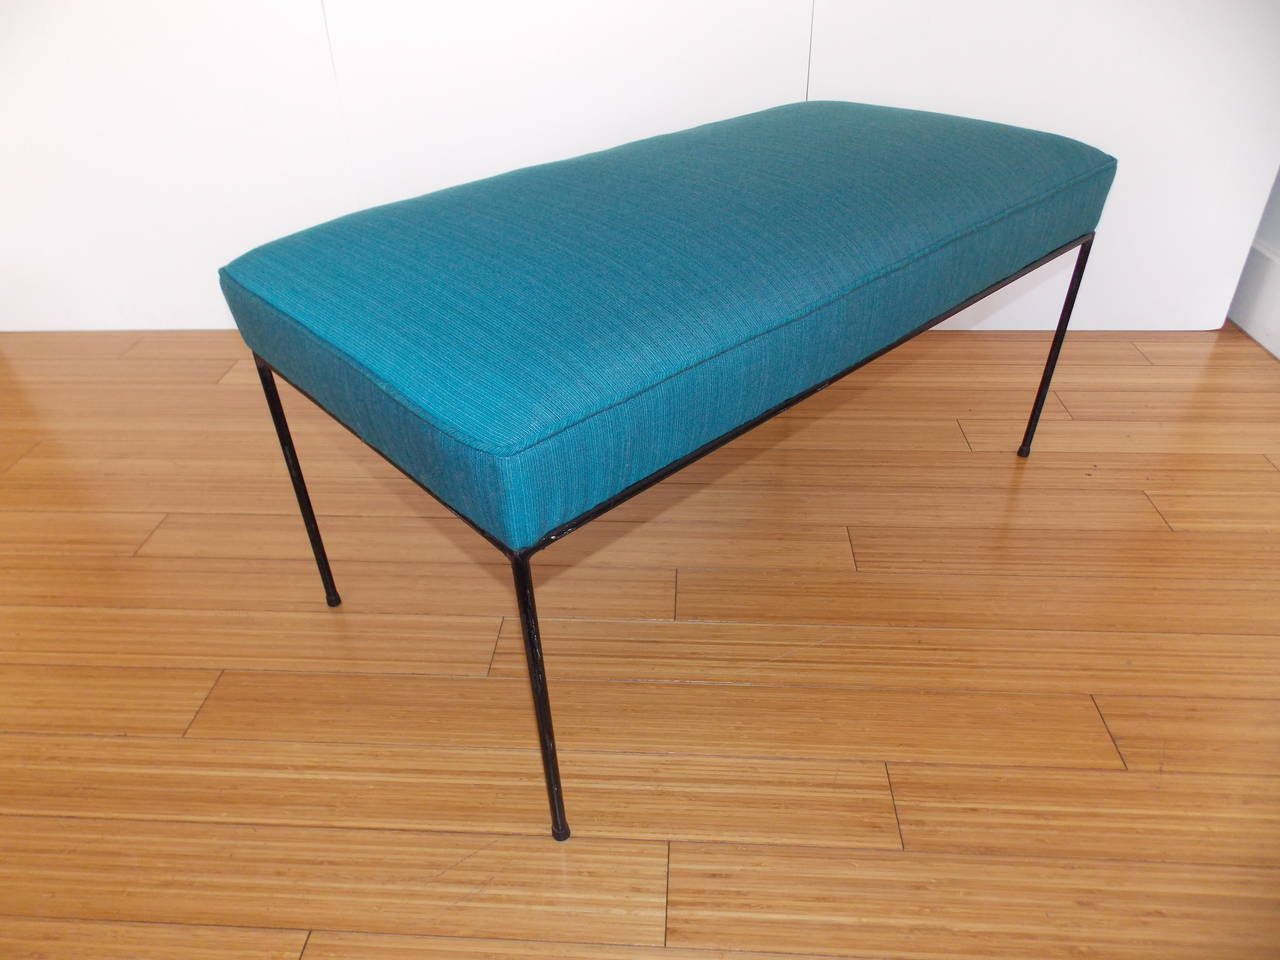 A simple and elegant design.
Made of powder coated rod iron steel with new upholstery.
The base shows the original ware and screws.
No damage.
Great to place anywhere in the home.